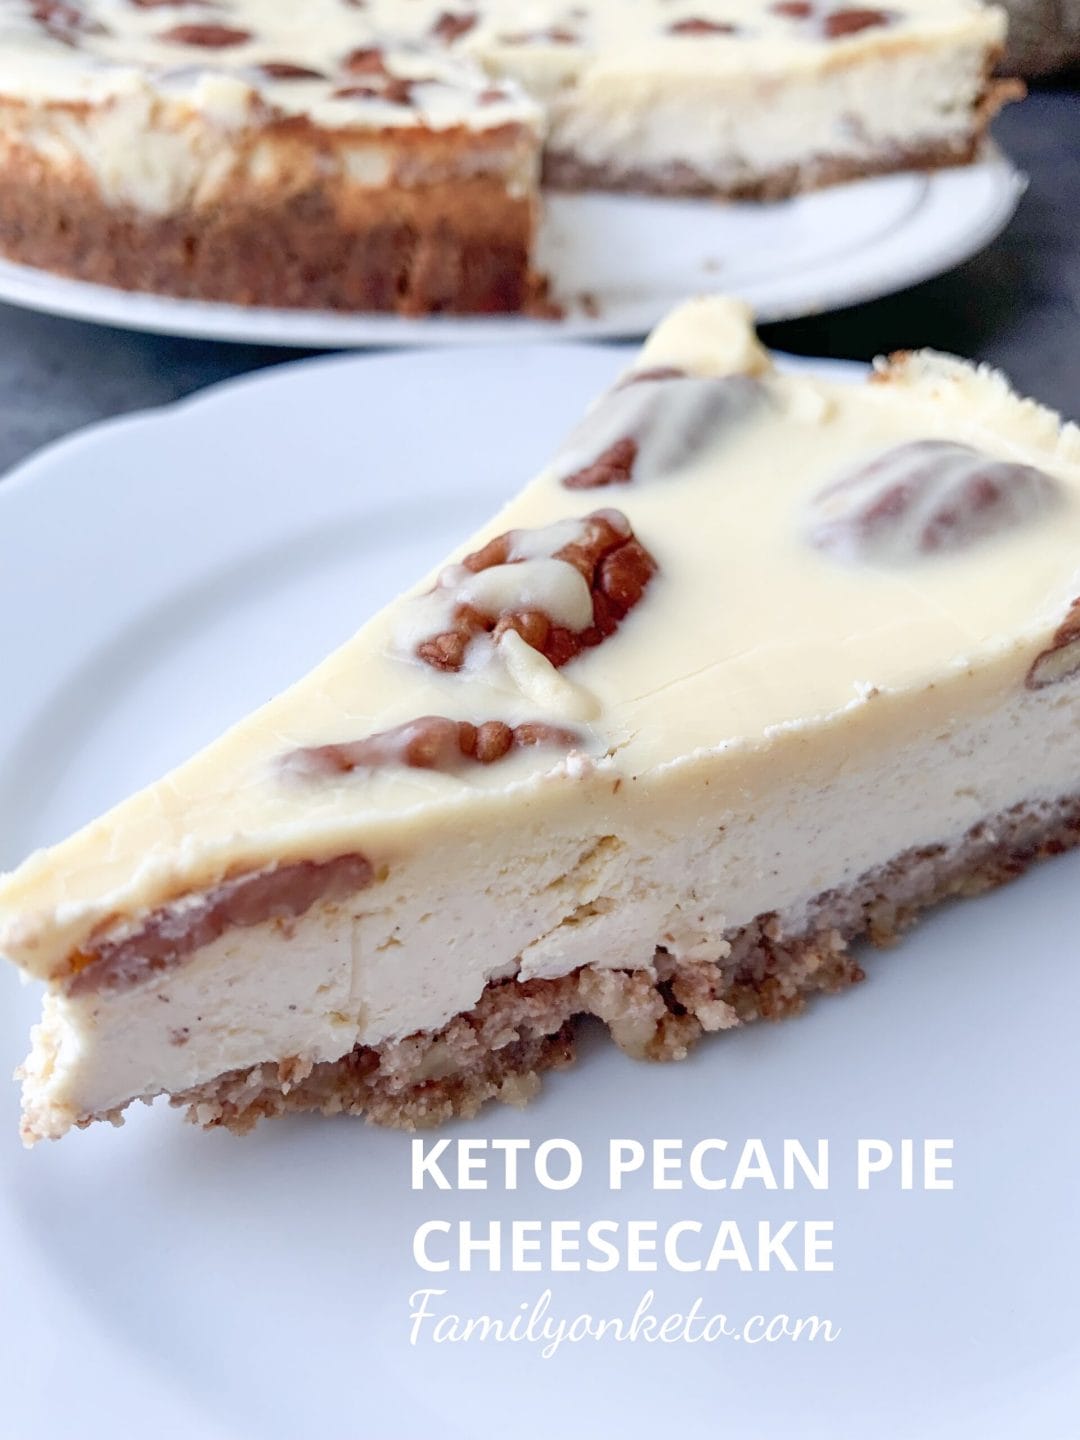 Picture of delicious keto pecan pie cheesecake with pecan caramel topping